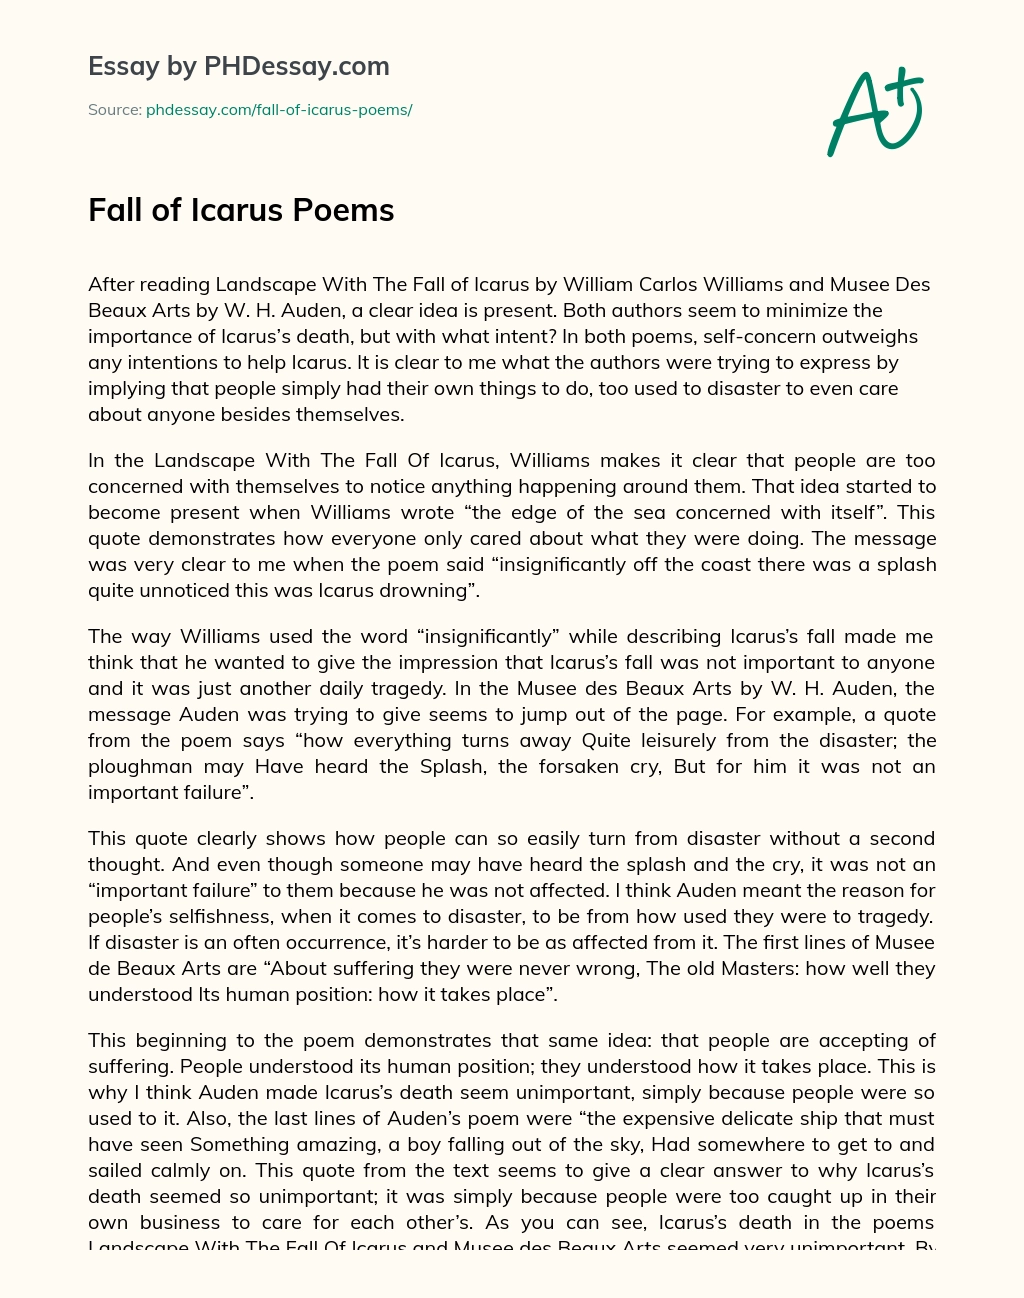 Fall of Icarus Poems essay